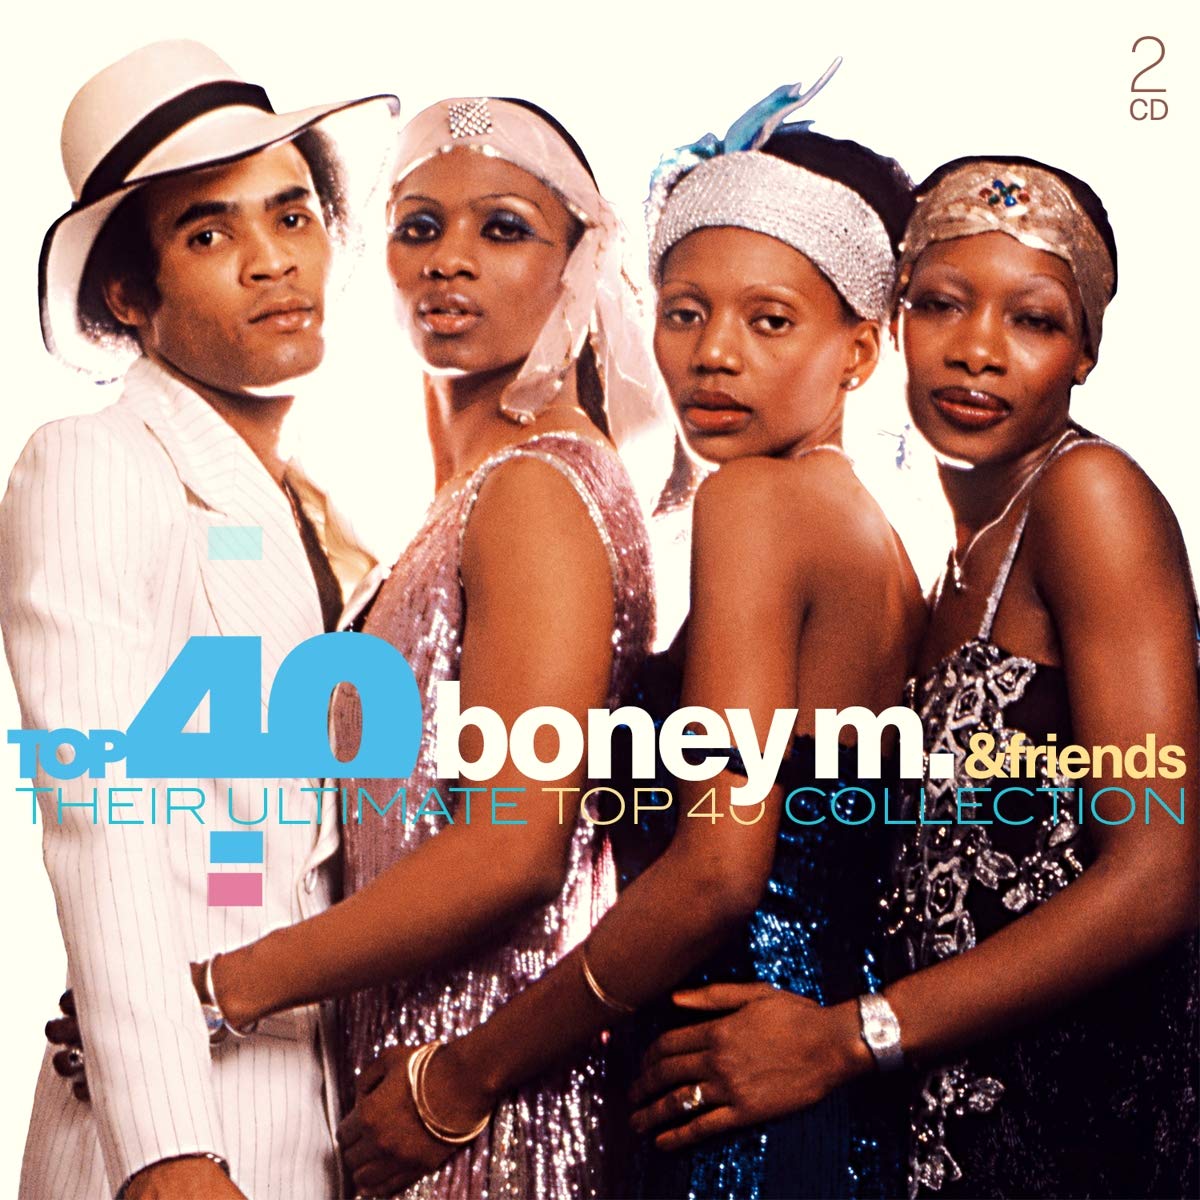 Far Corporation - Boney M. & Friends  Their Ultimate Top 40 Collection (2017) [FLAC] Download